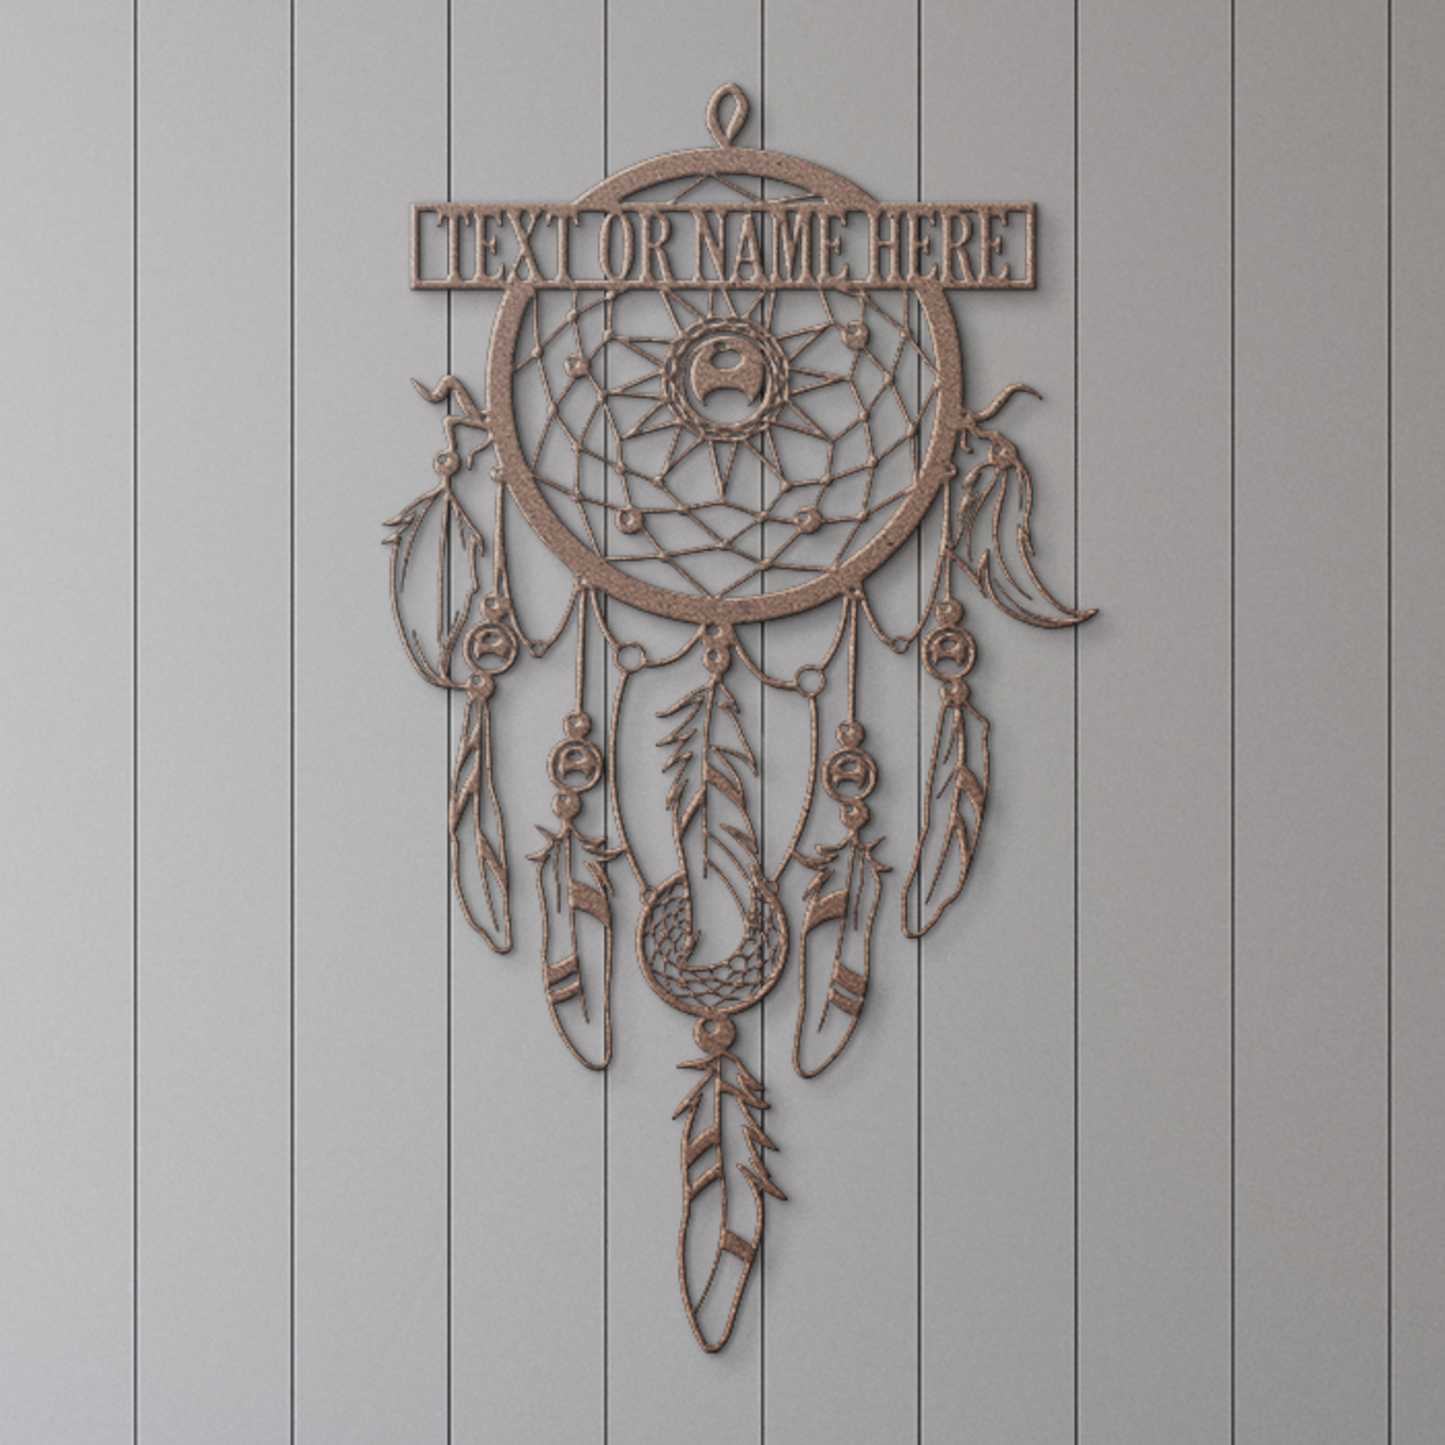 Personalized Dreamcatcher Name Metal Sign. Customizable Steel Sign. Astrology Art. Personal Dreamcatcher Wall Decor Gift. Positive Energy